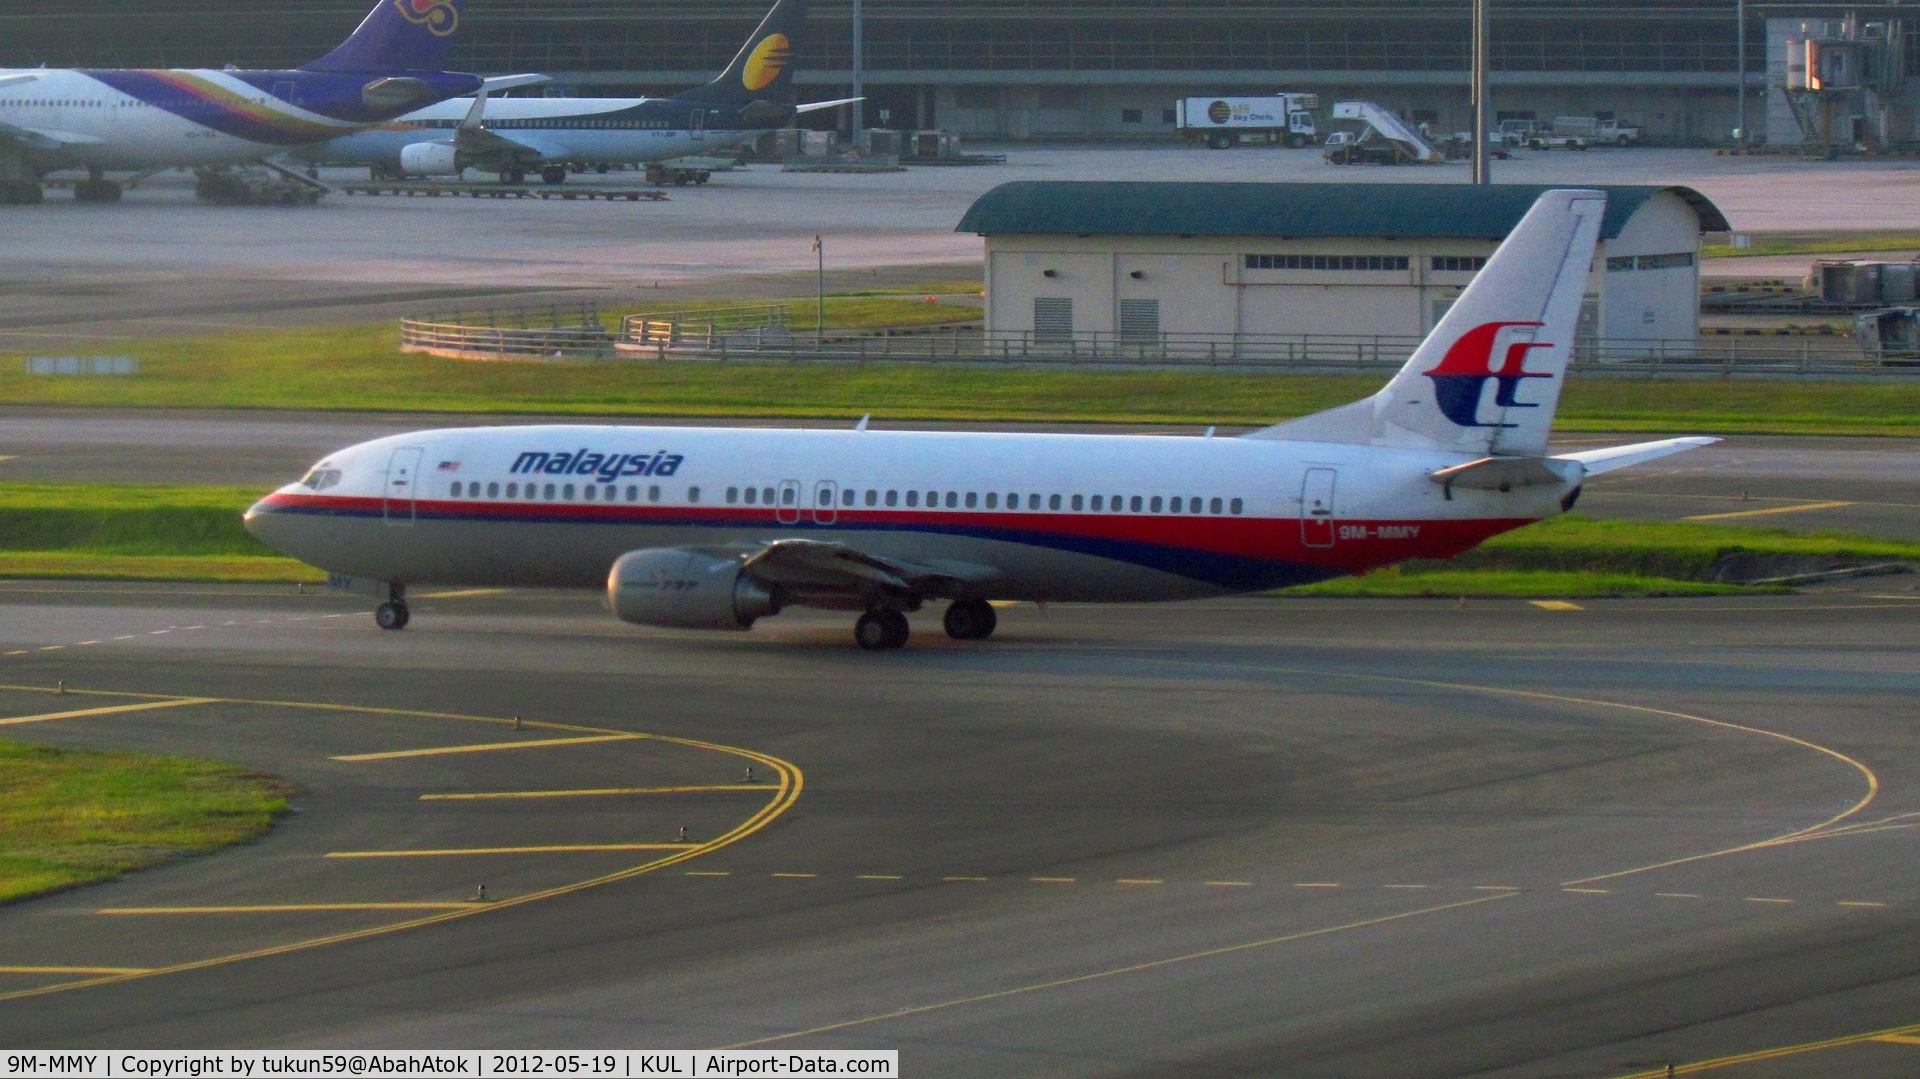 9M-MMY, Boeing 737-4H6 C/N 26455, Malaysia Airlines